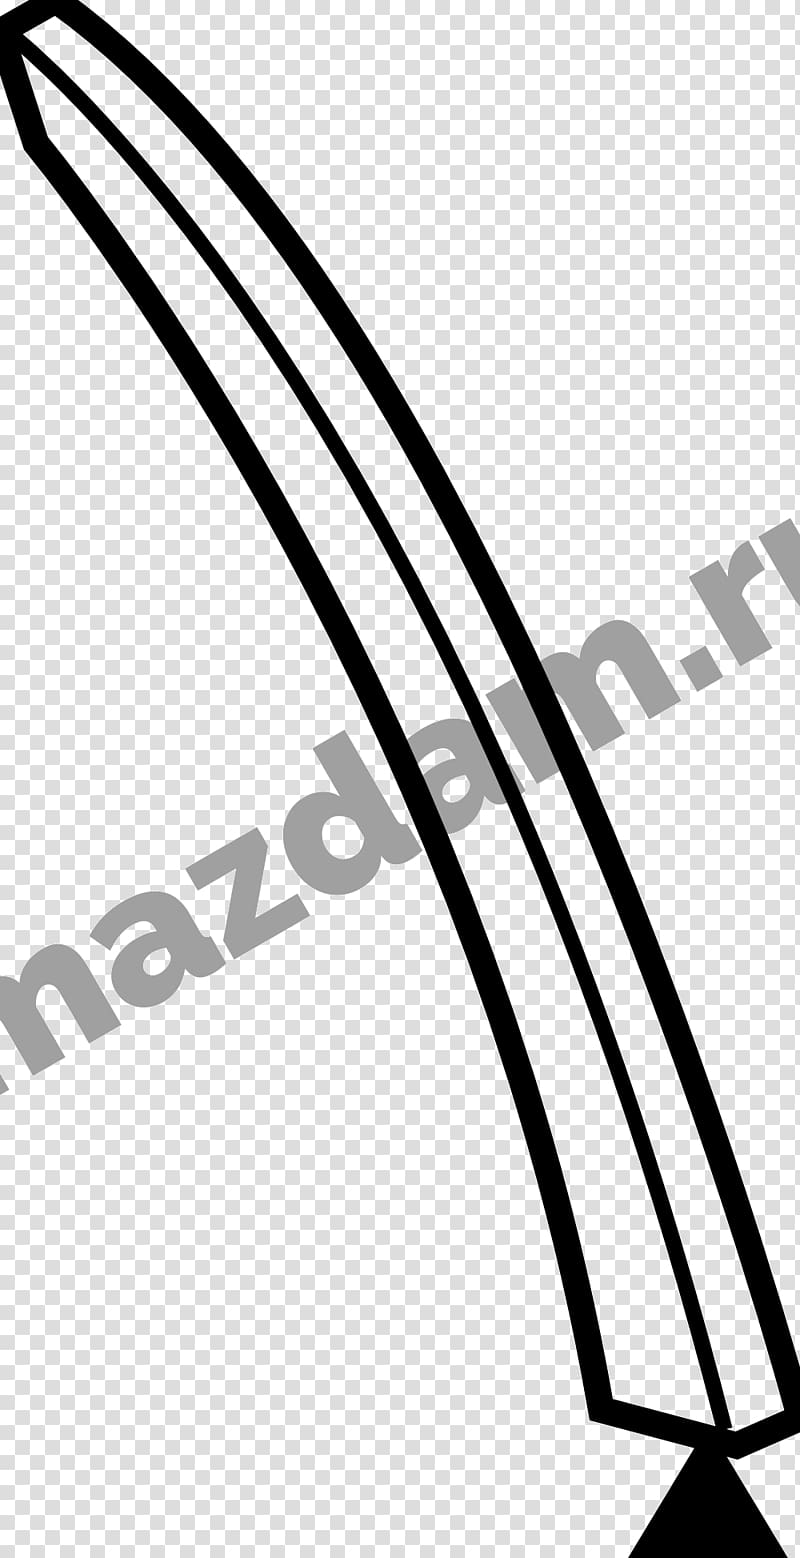 Mazda CX-5 Mazda Mazda5 Mazda3 Mazda Demio, mazda transparent background PNG clipart